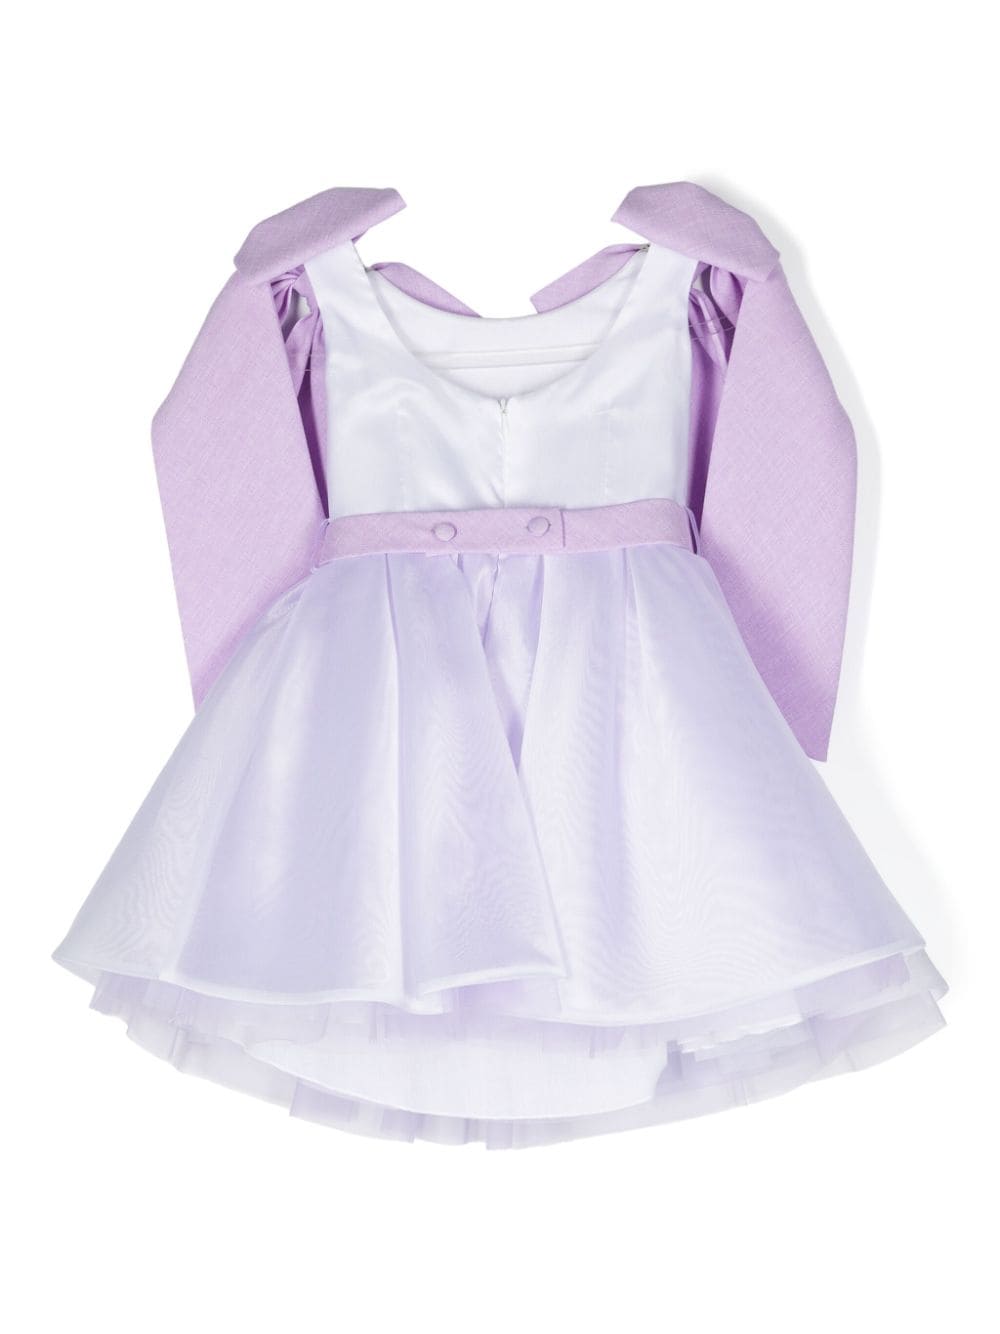 White dress for girls with lavender bow